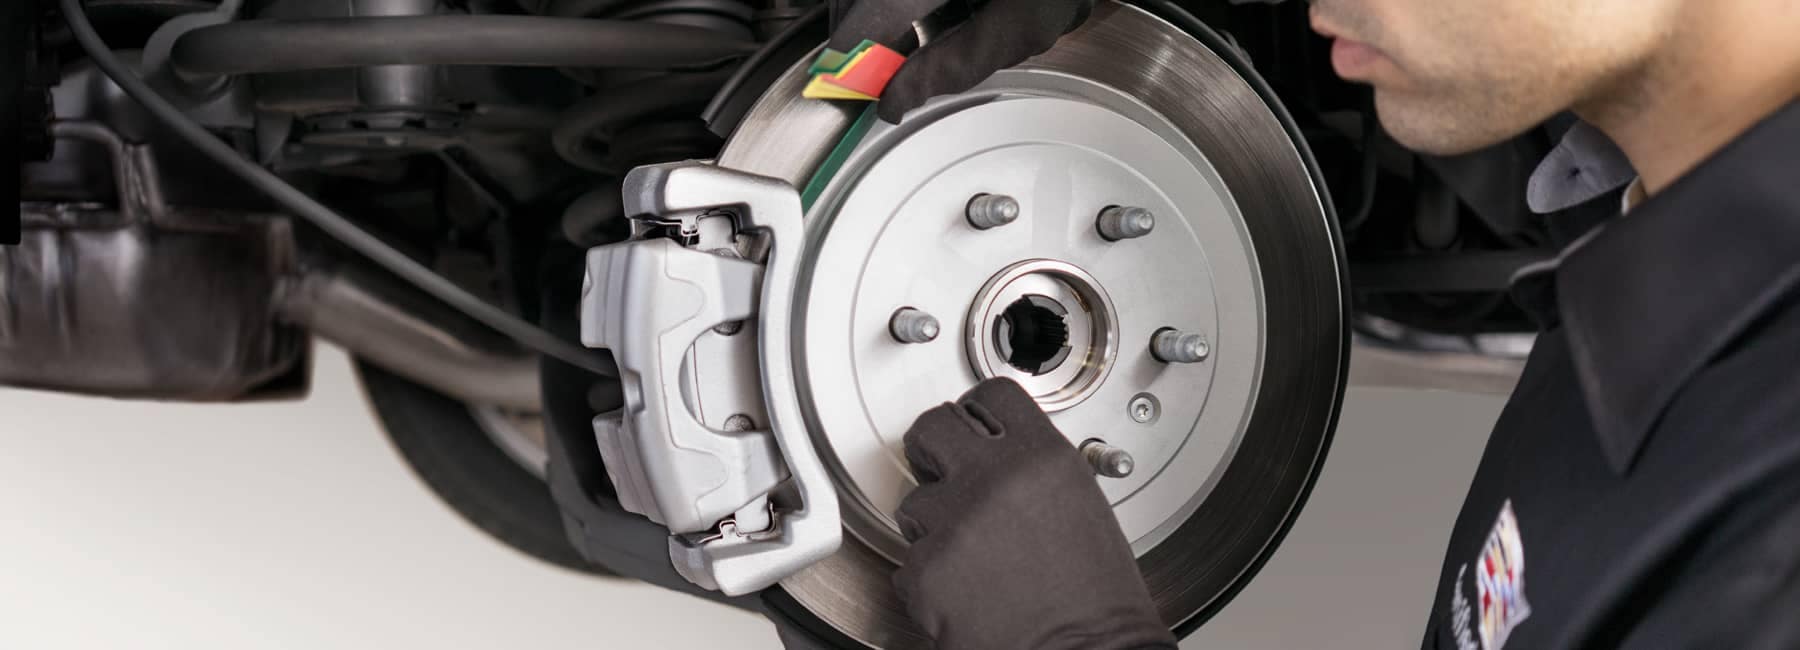 Cadillac service technician working on brakes